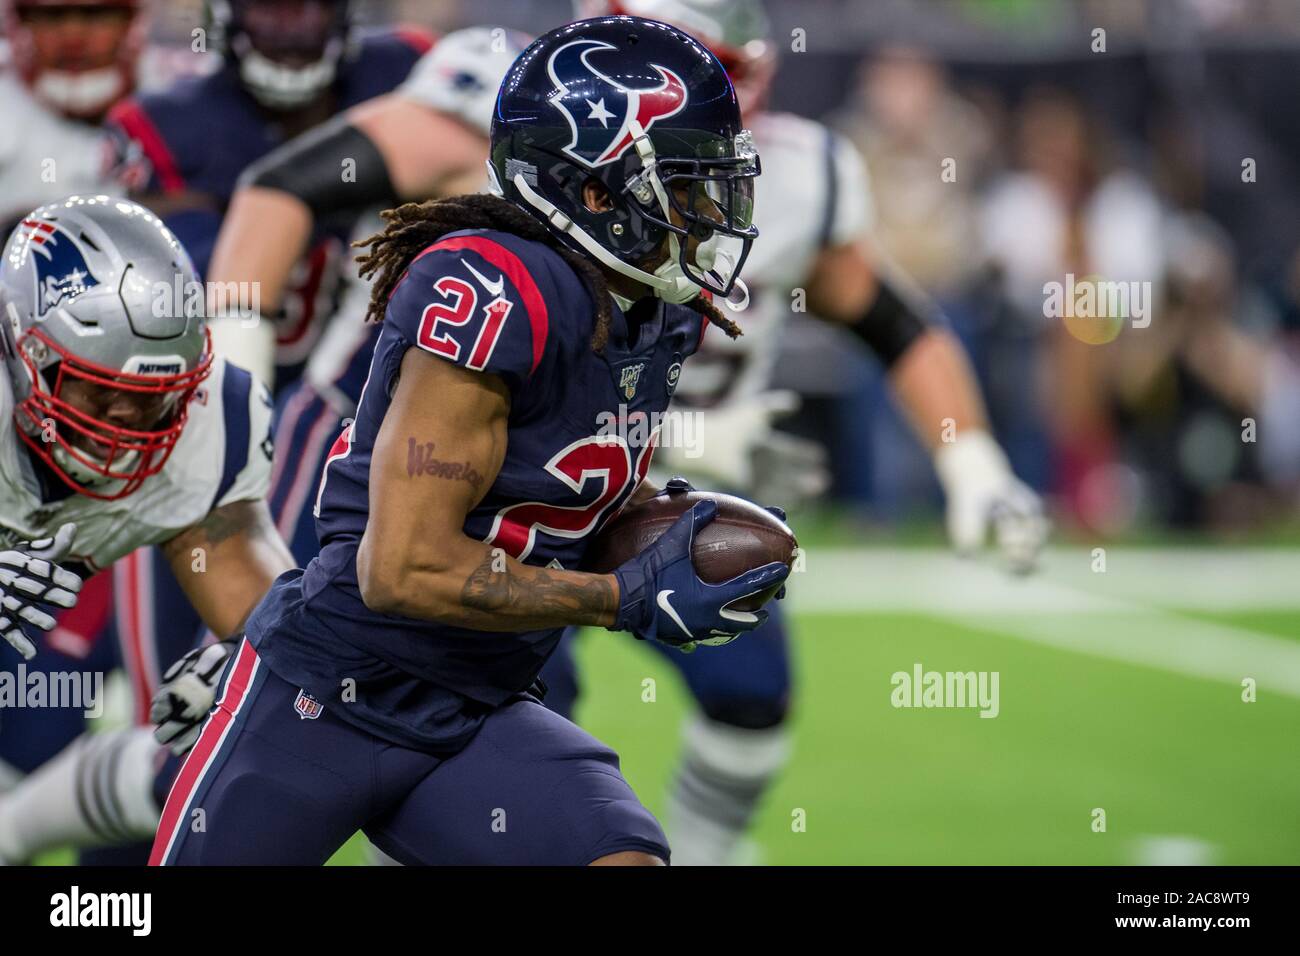 Houston, TX, USA. 1st Dec, 2019. Houston Texans cornerback Bradley Roby (21) runs with the ball after making an interception during the 1st quarter of an NFL football game between the New England Patriots and the Houston Texans at NRG Stadium in Houston, TX. Trask Smith/CSM/Alamy Live News Stock Photo